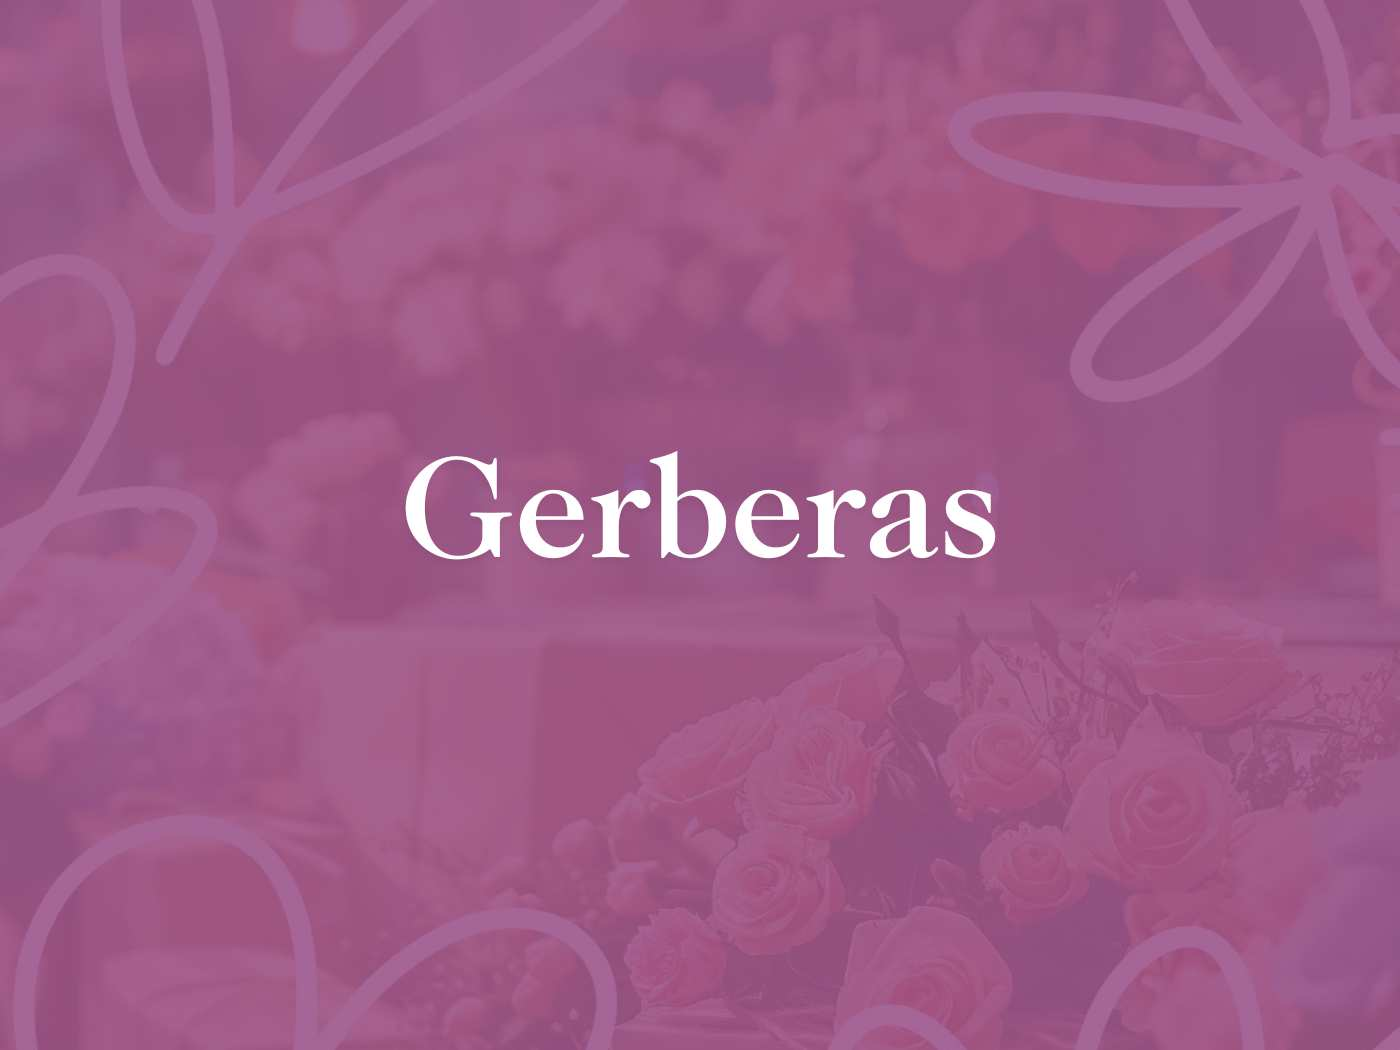 A plain purple background, with the text 'Gerberas' for the Gerbera collection.